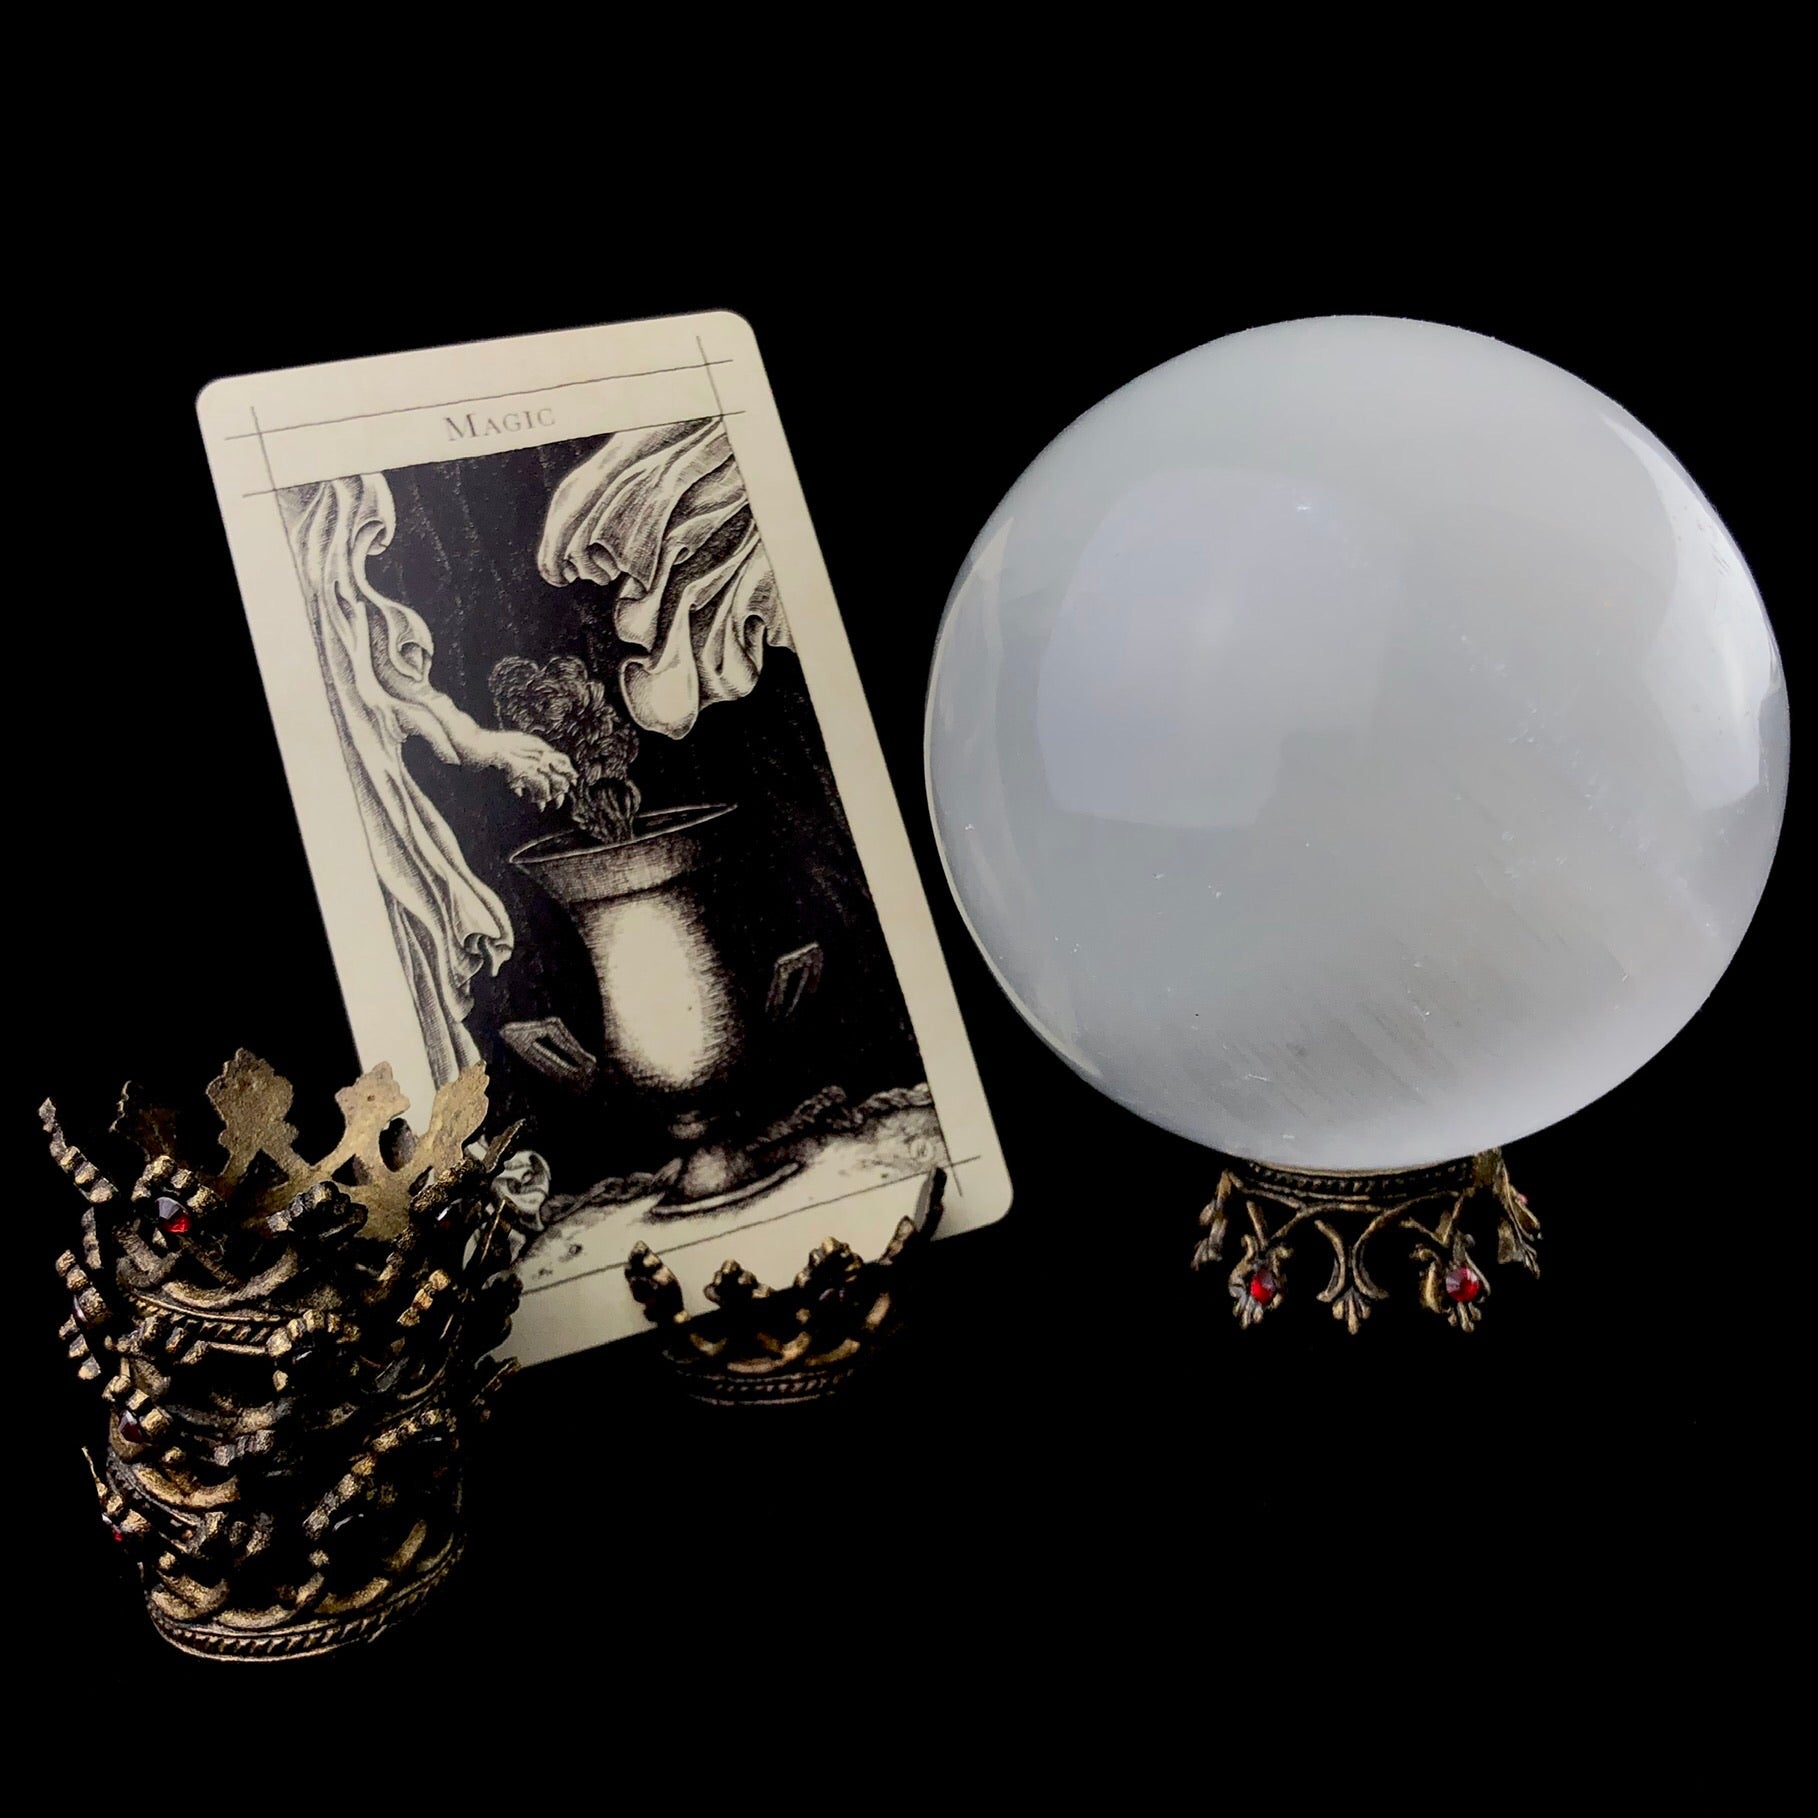 Selenite Sphere shown resting on a Mini Crown as a display stand